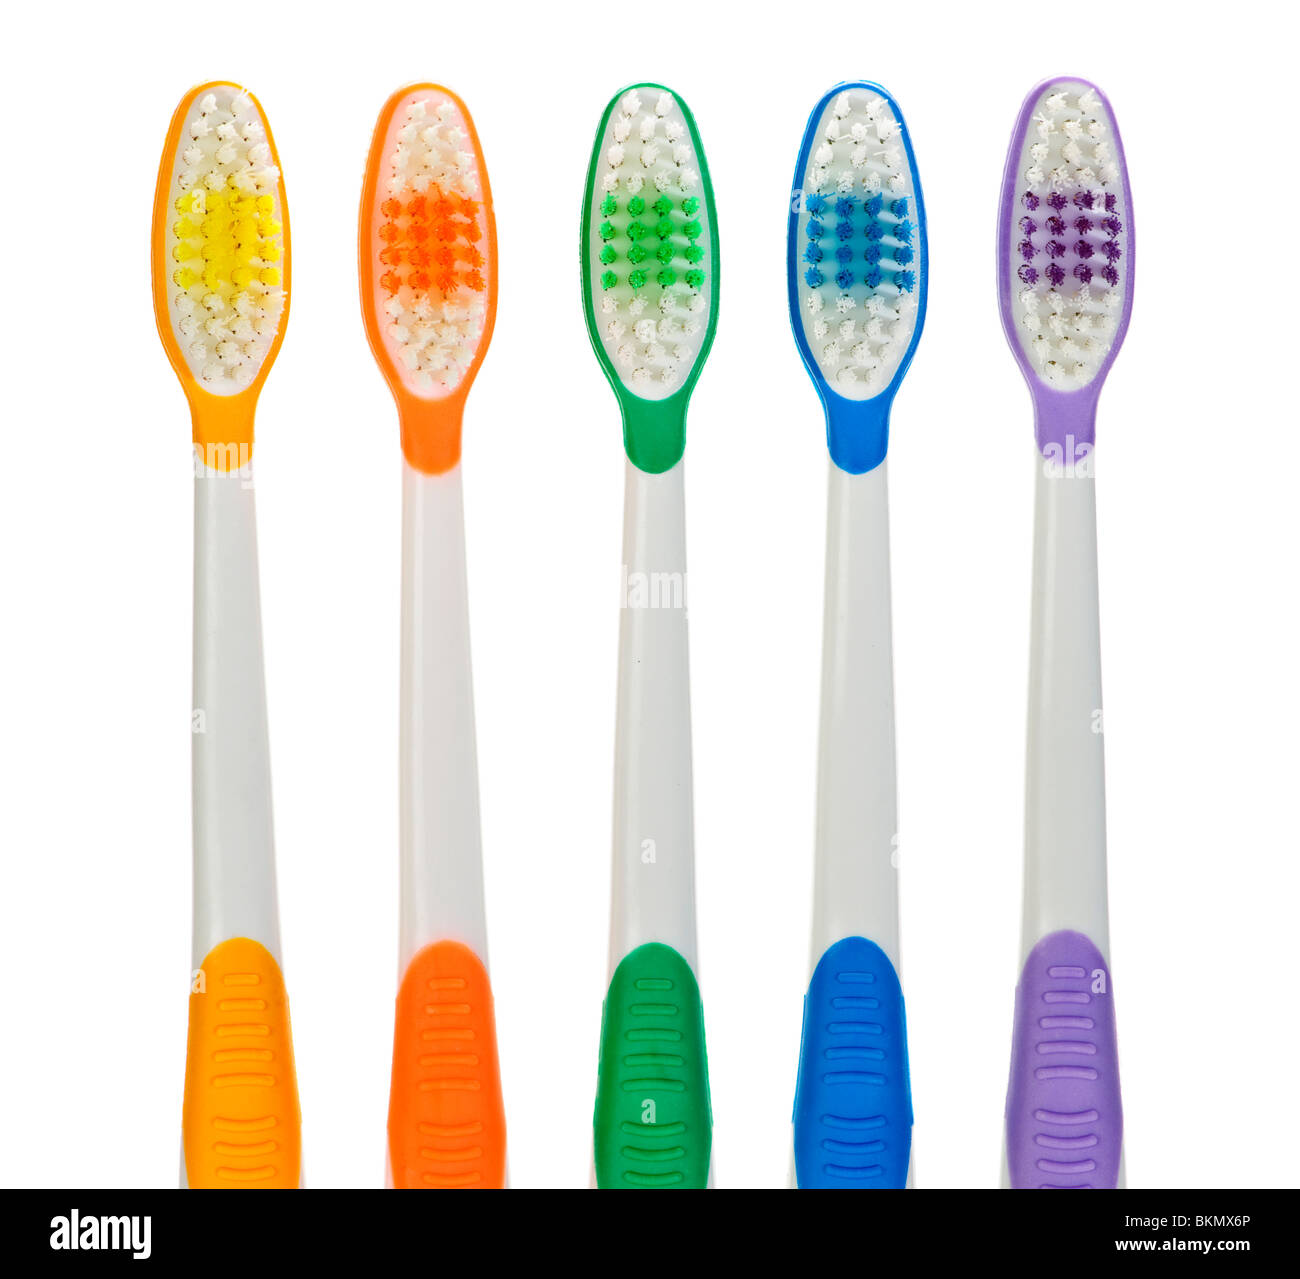 Close up of multicolored toothbrushes on white background Stock Photo